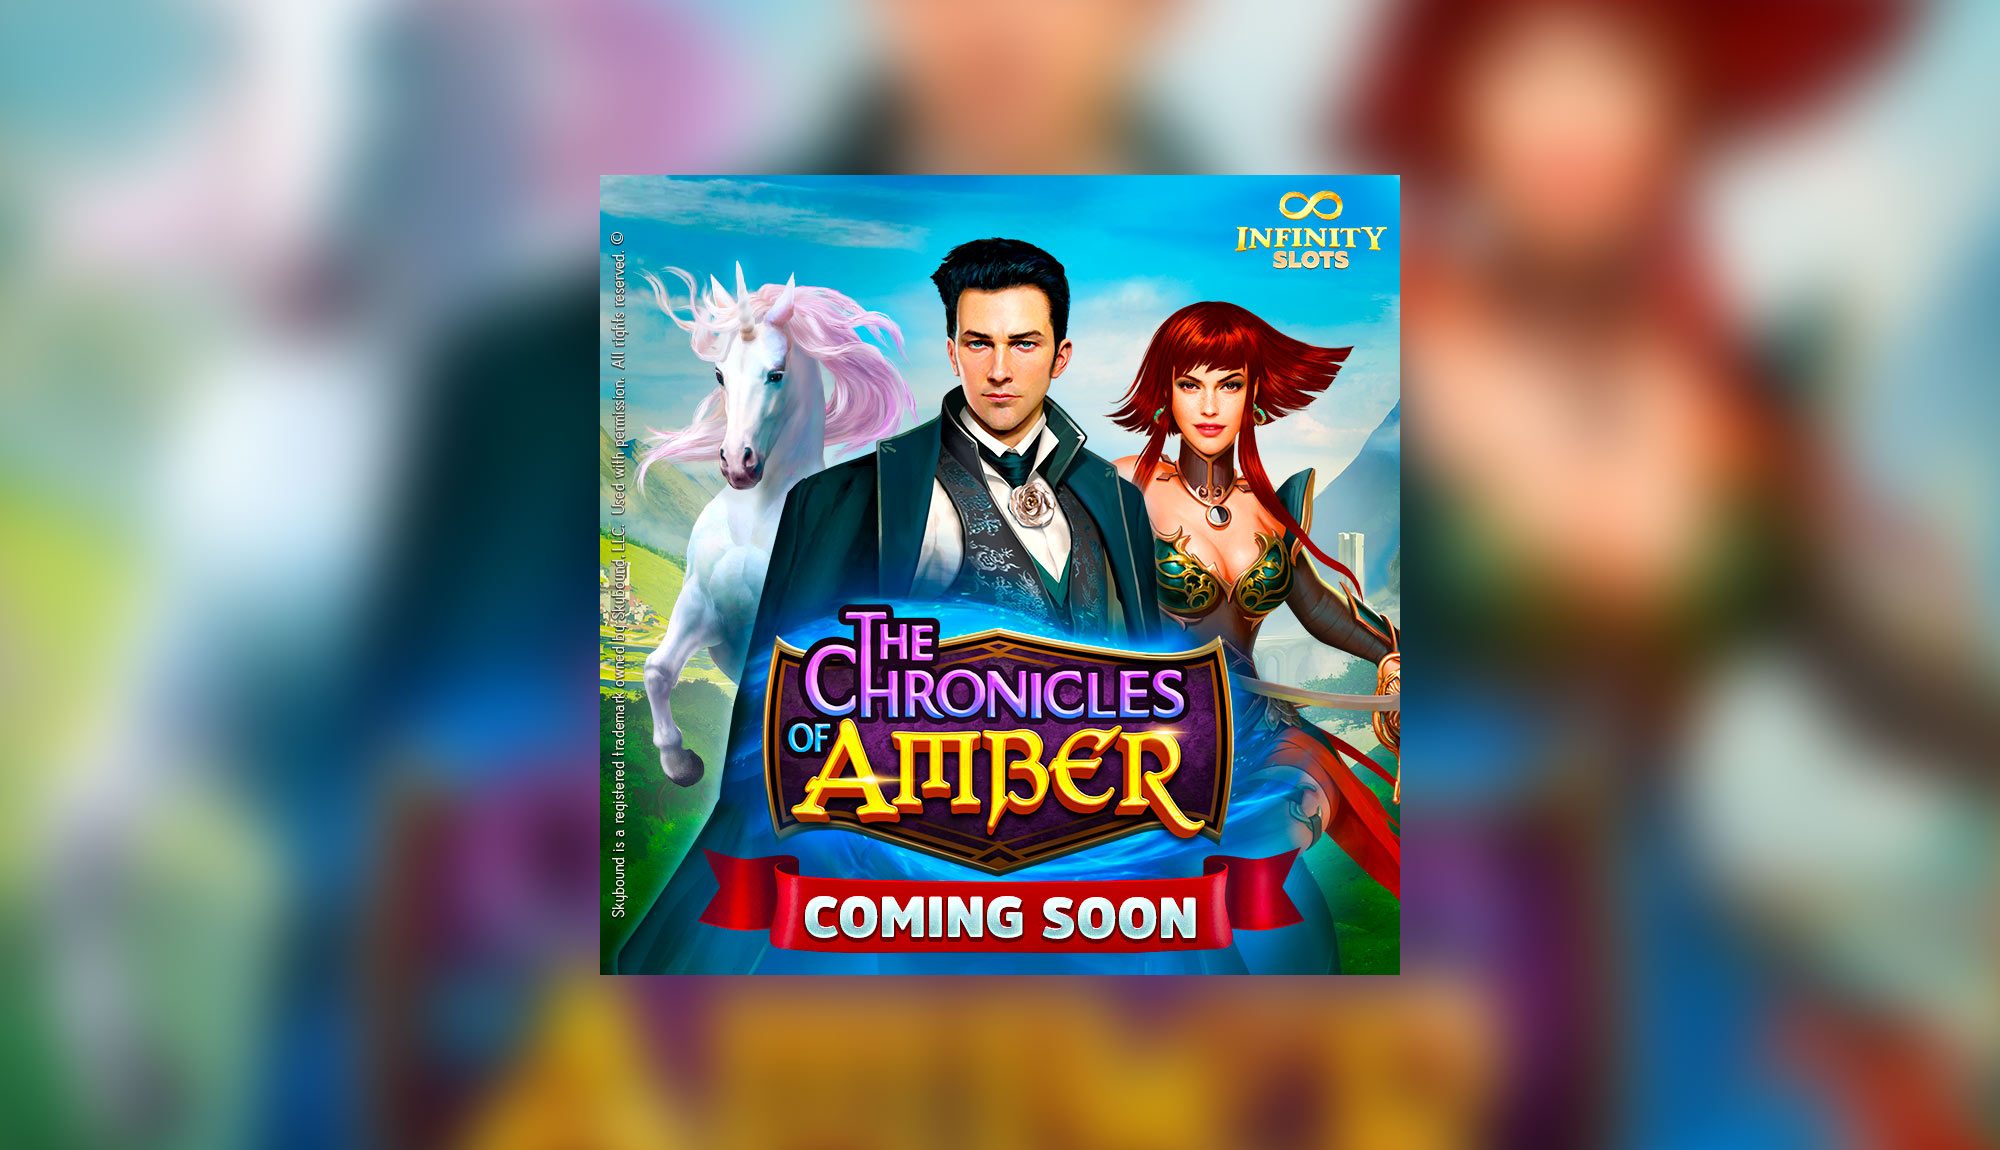 INFINITY SLOTS Gets Slot Game Based on CHRONICLES OF AMBER